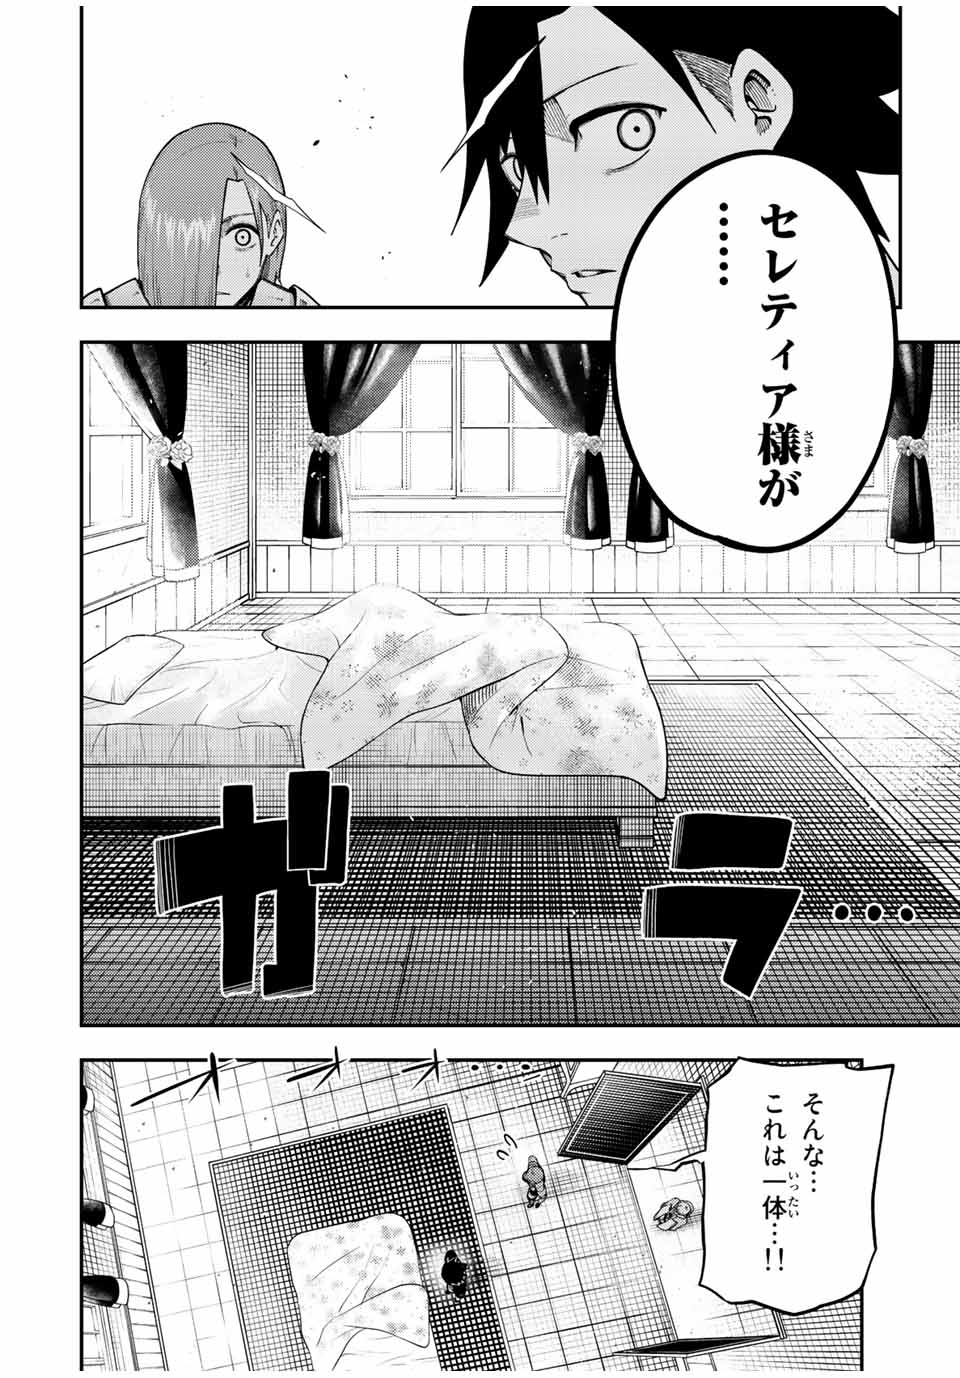 the strongest former prince-; 奴隷転生 ～その奴隷、最強の元王子につき～ 第115話 - Page 14